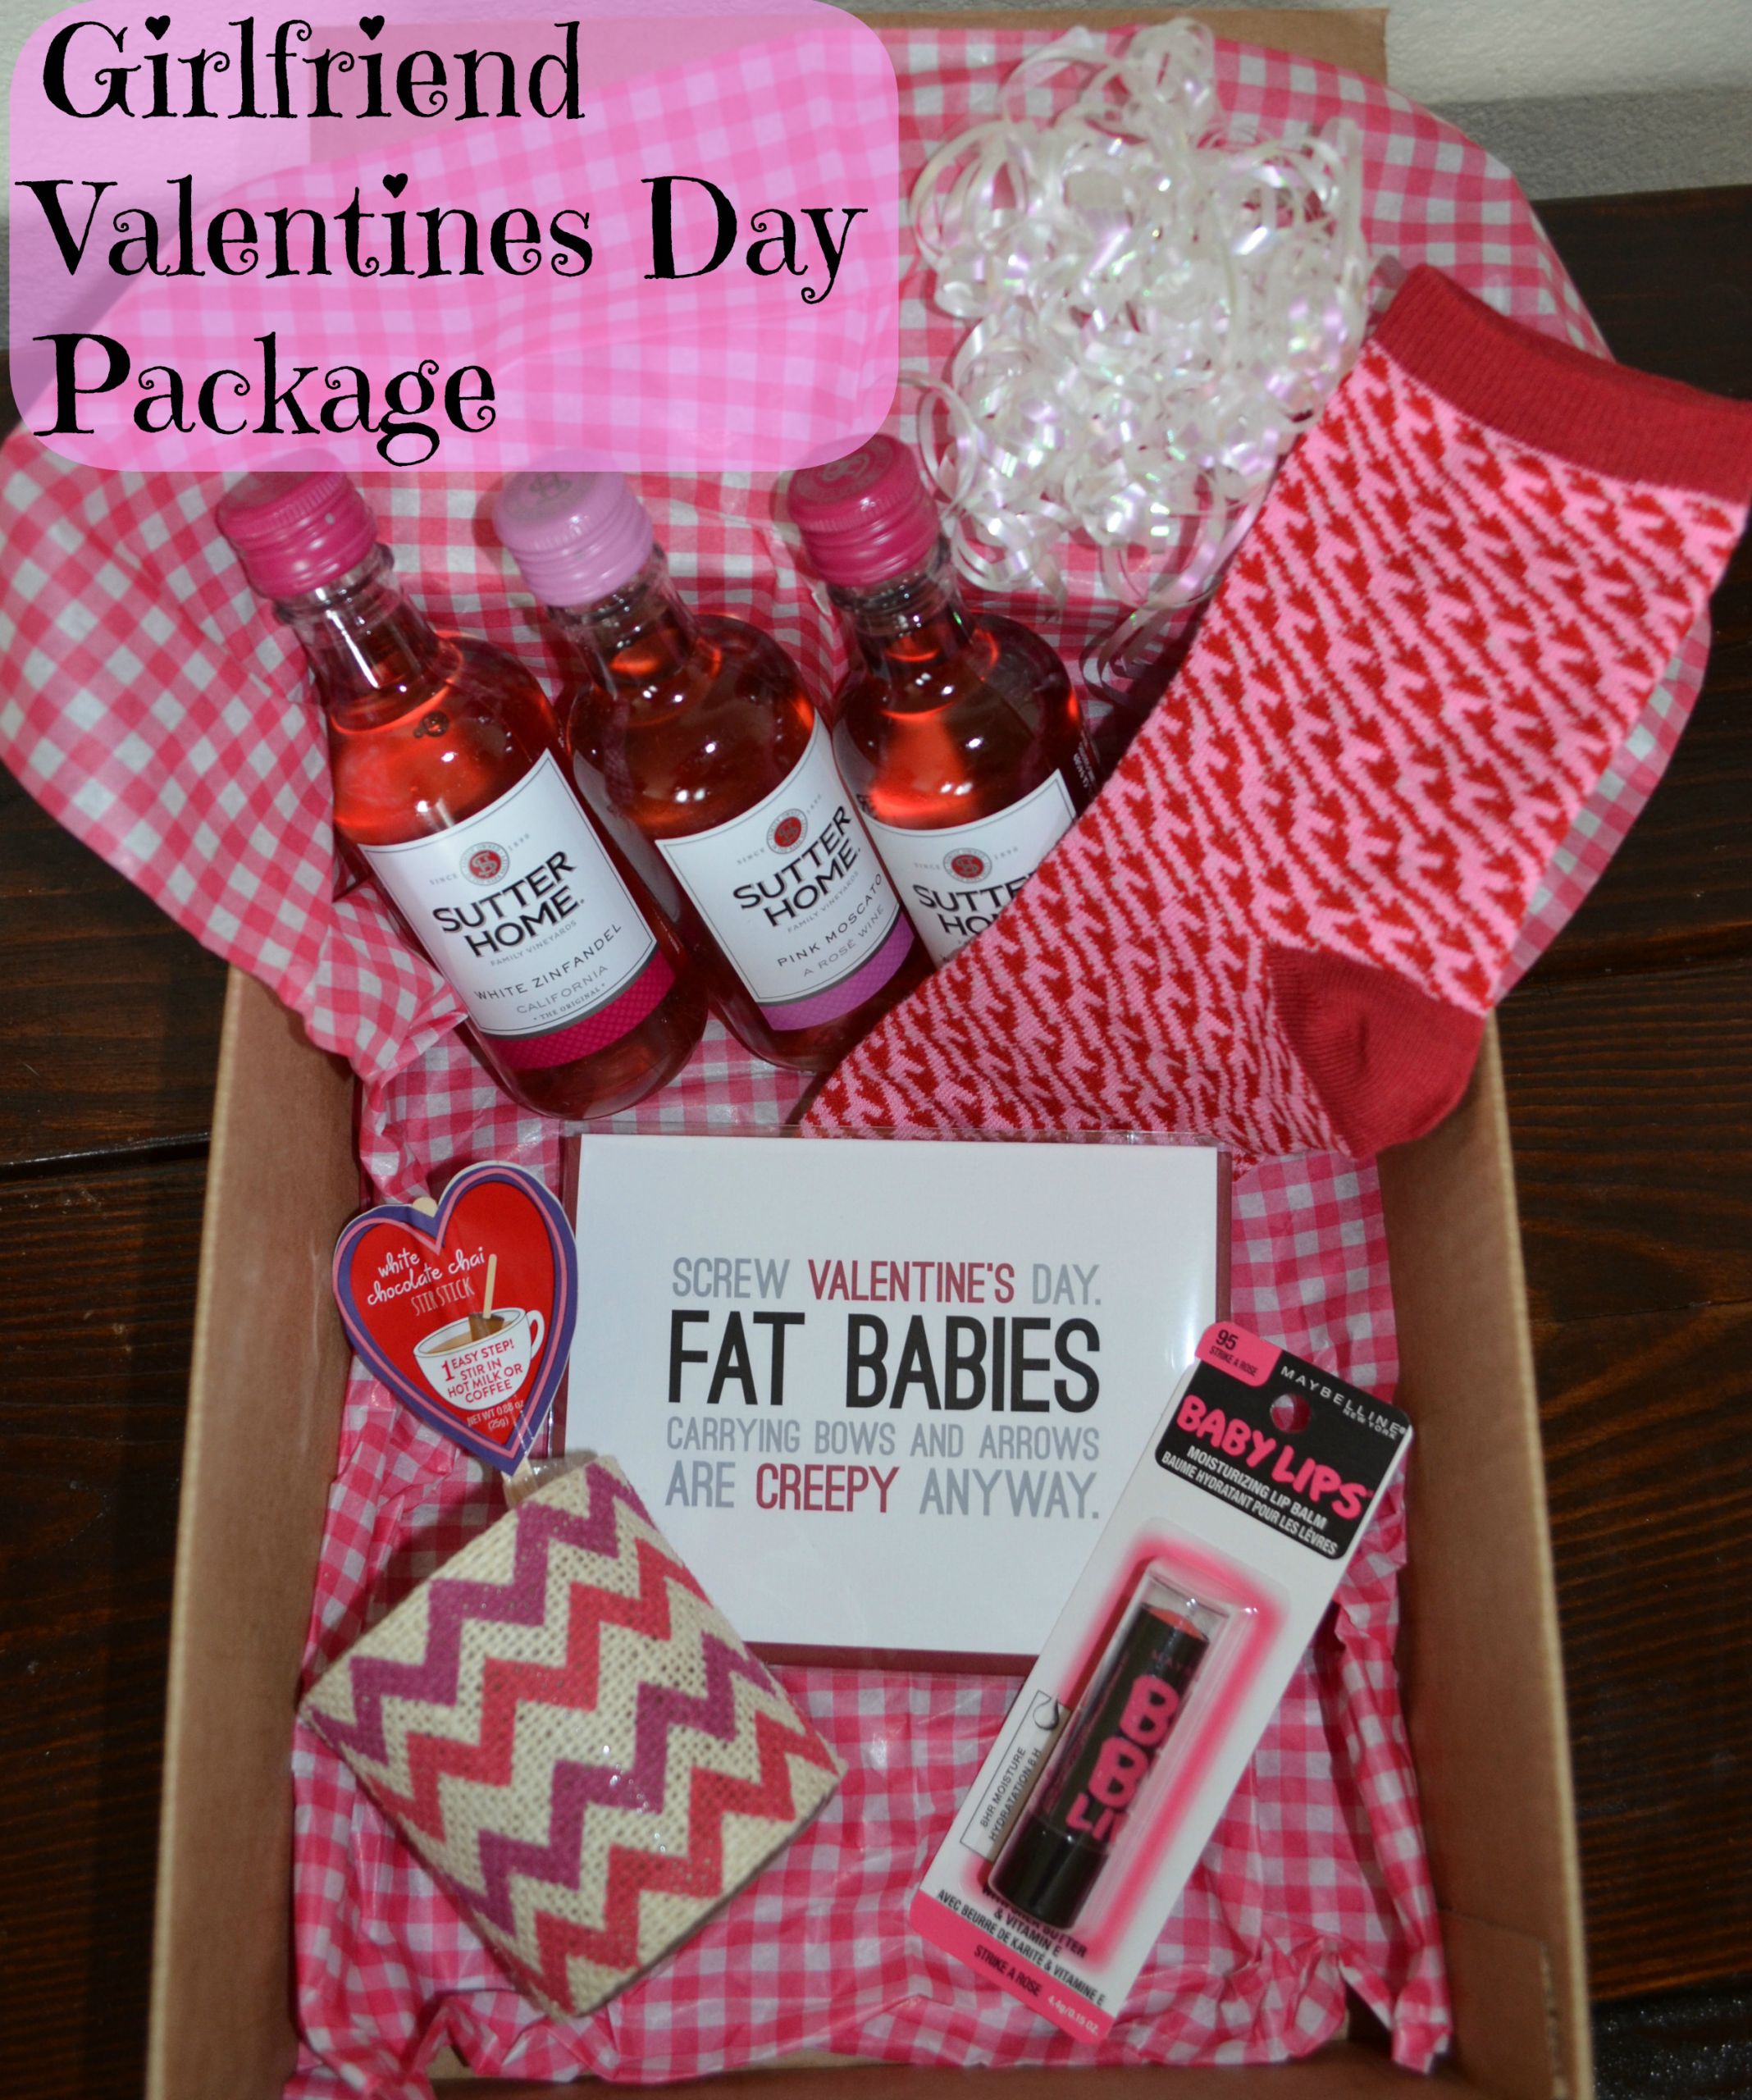 Valentine'S Day Gift Ideas For Girlfriend
 24 ADORABLE GIFT IDEAS FOR THE WOMEN IN YOUR LIFE